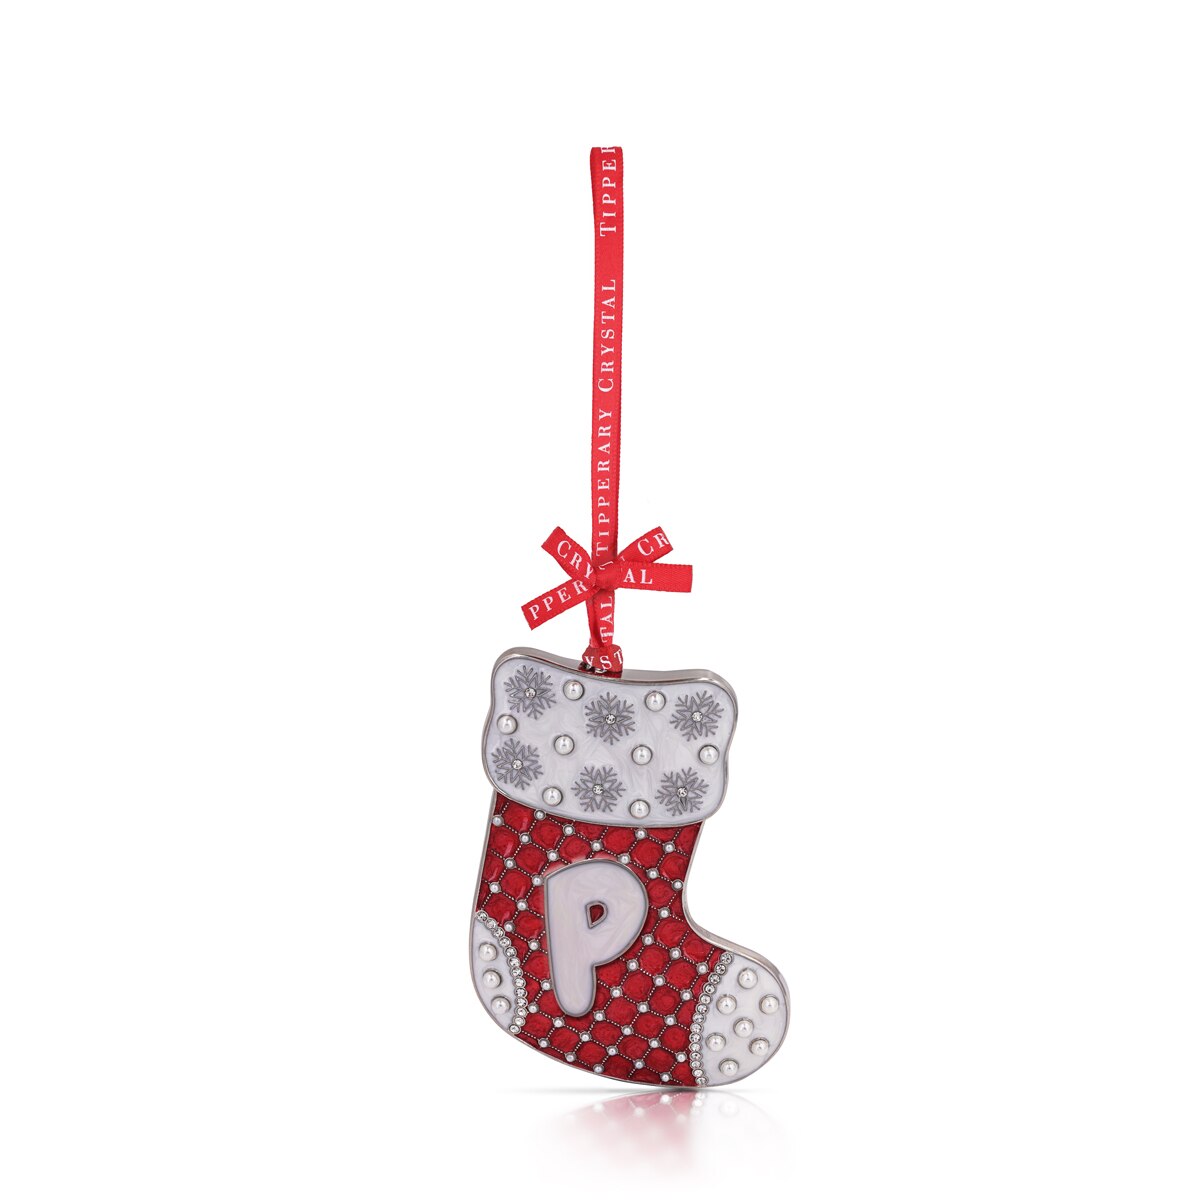 Tipperary Crystal Alphabet Stocking Christmas Decoration - P - Last chance to buy